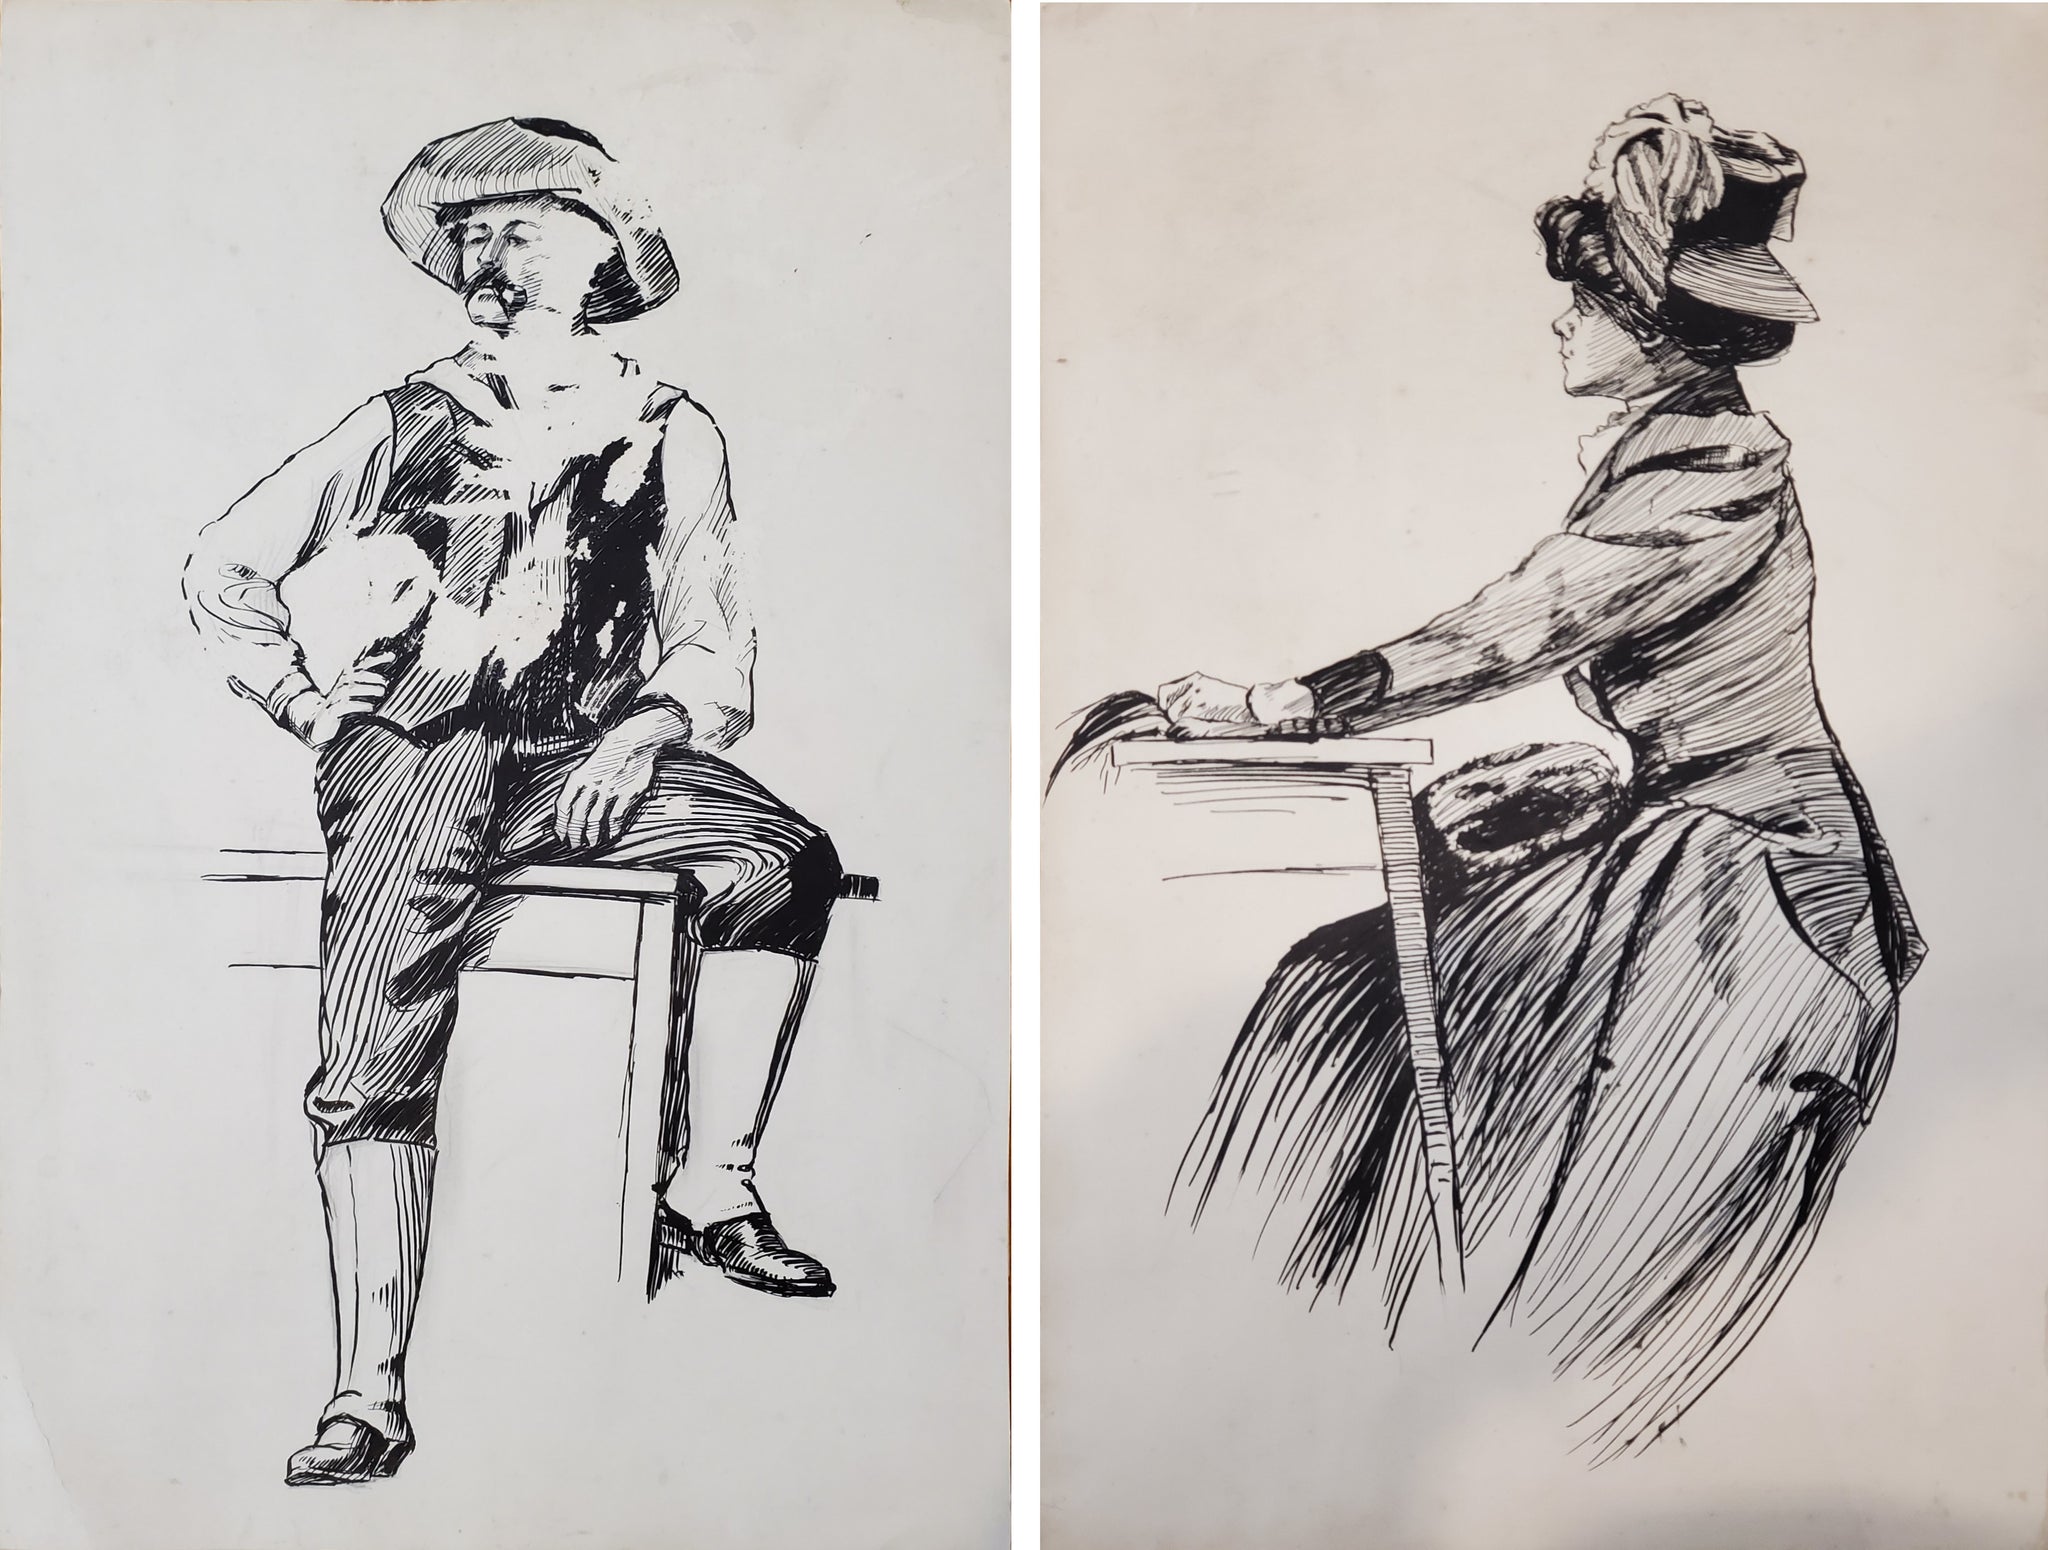 Pair of Antique American School Drawings circa 1900 featuring the fashion of a man and a woman at the turn of the 20th century.